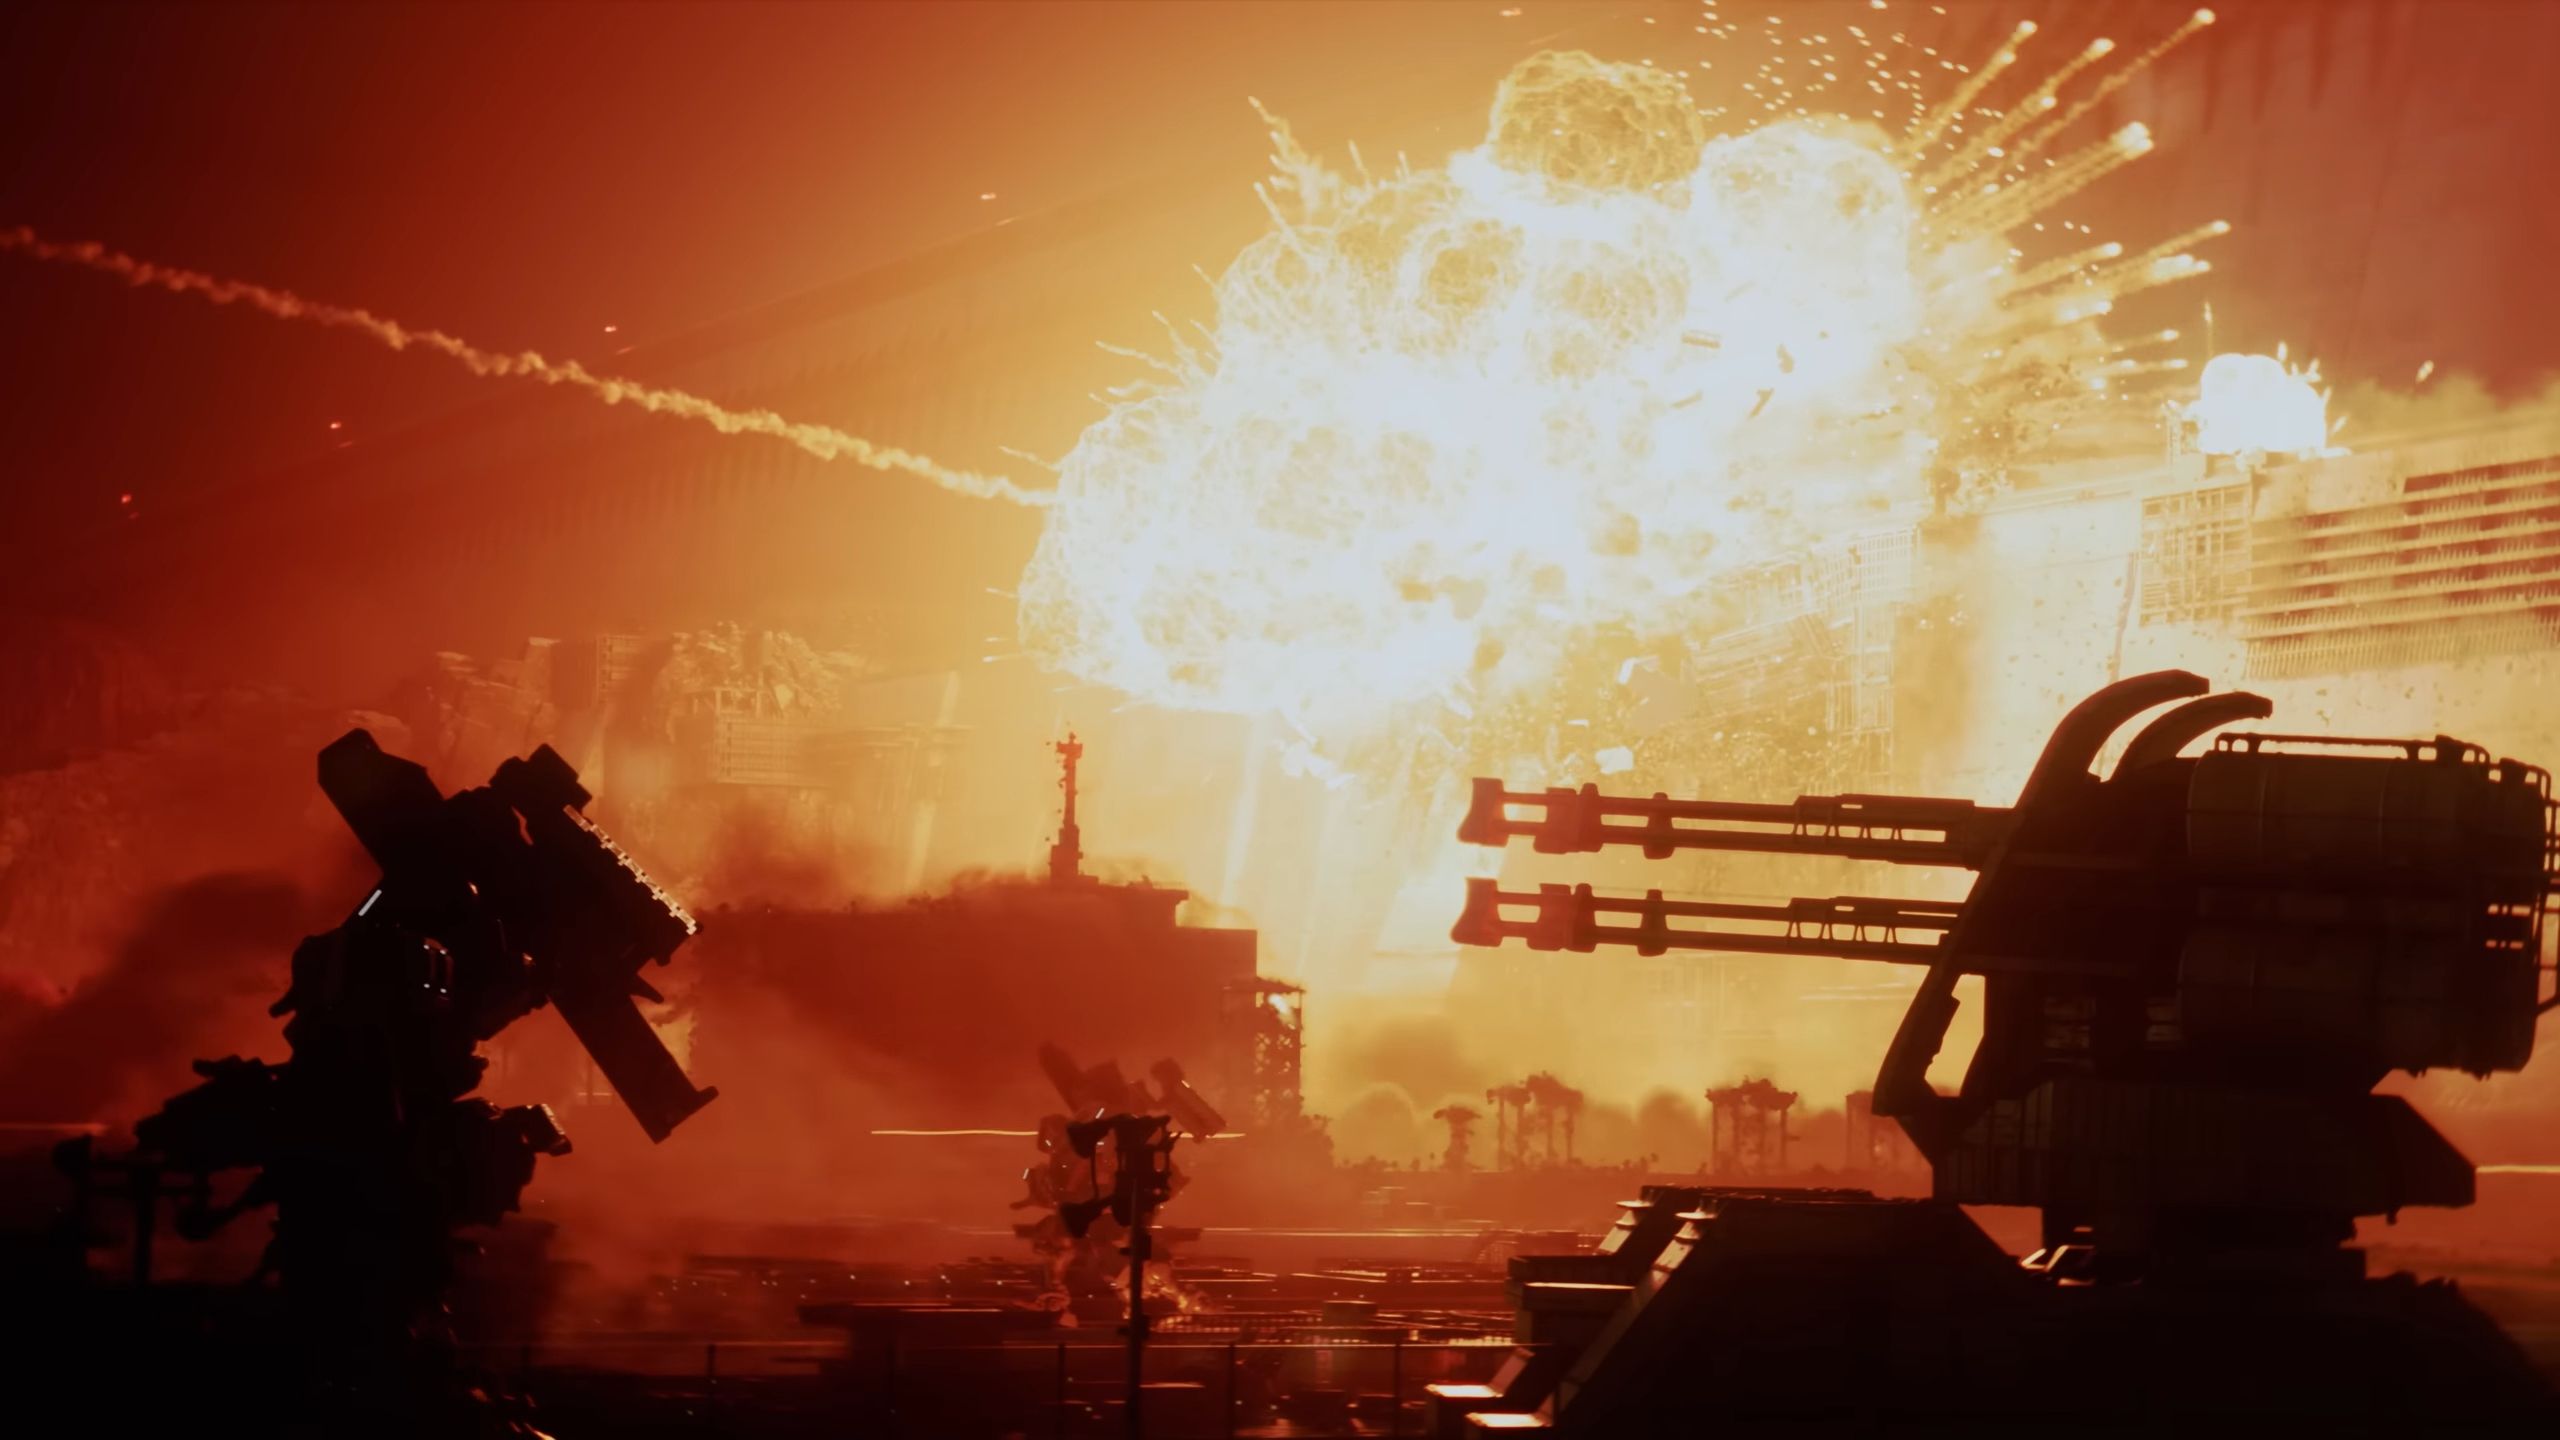 An image from the trailer for Armored Core 6, showing an exploding wall protected by turrets and mechs